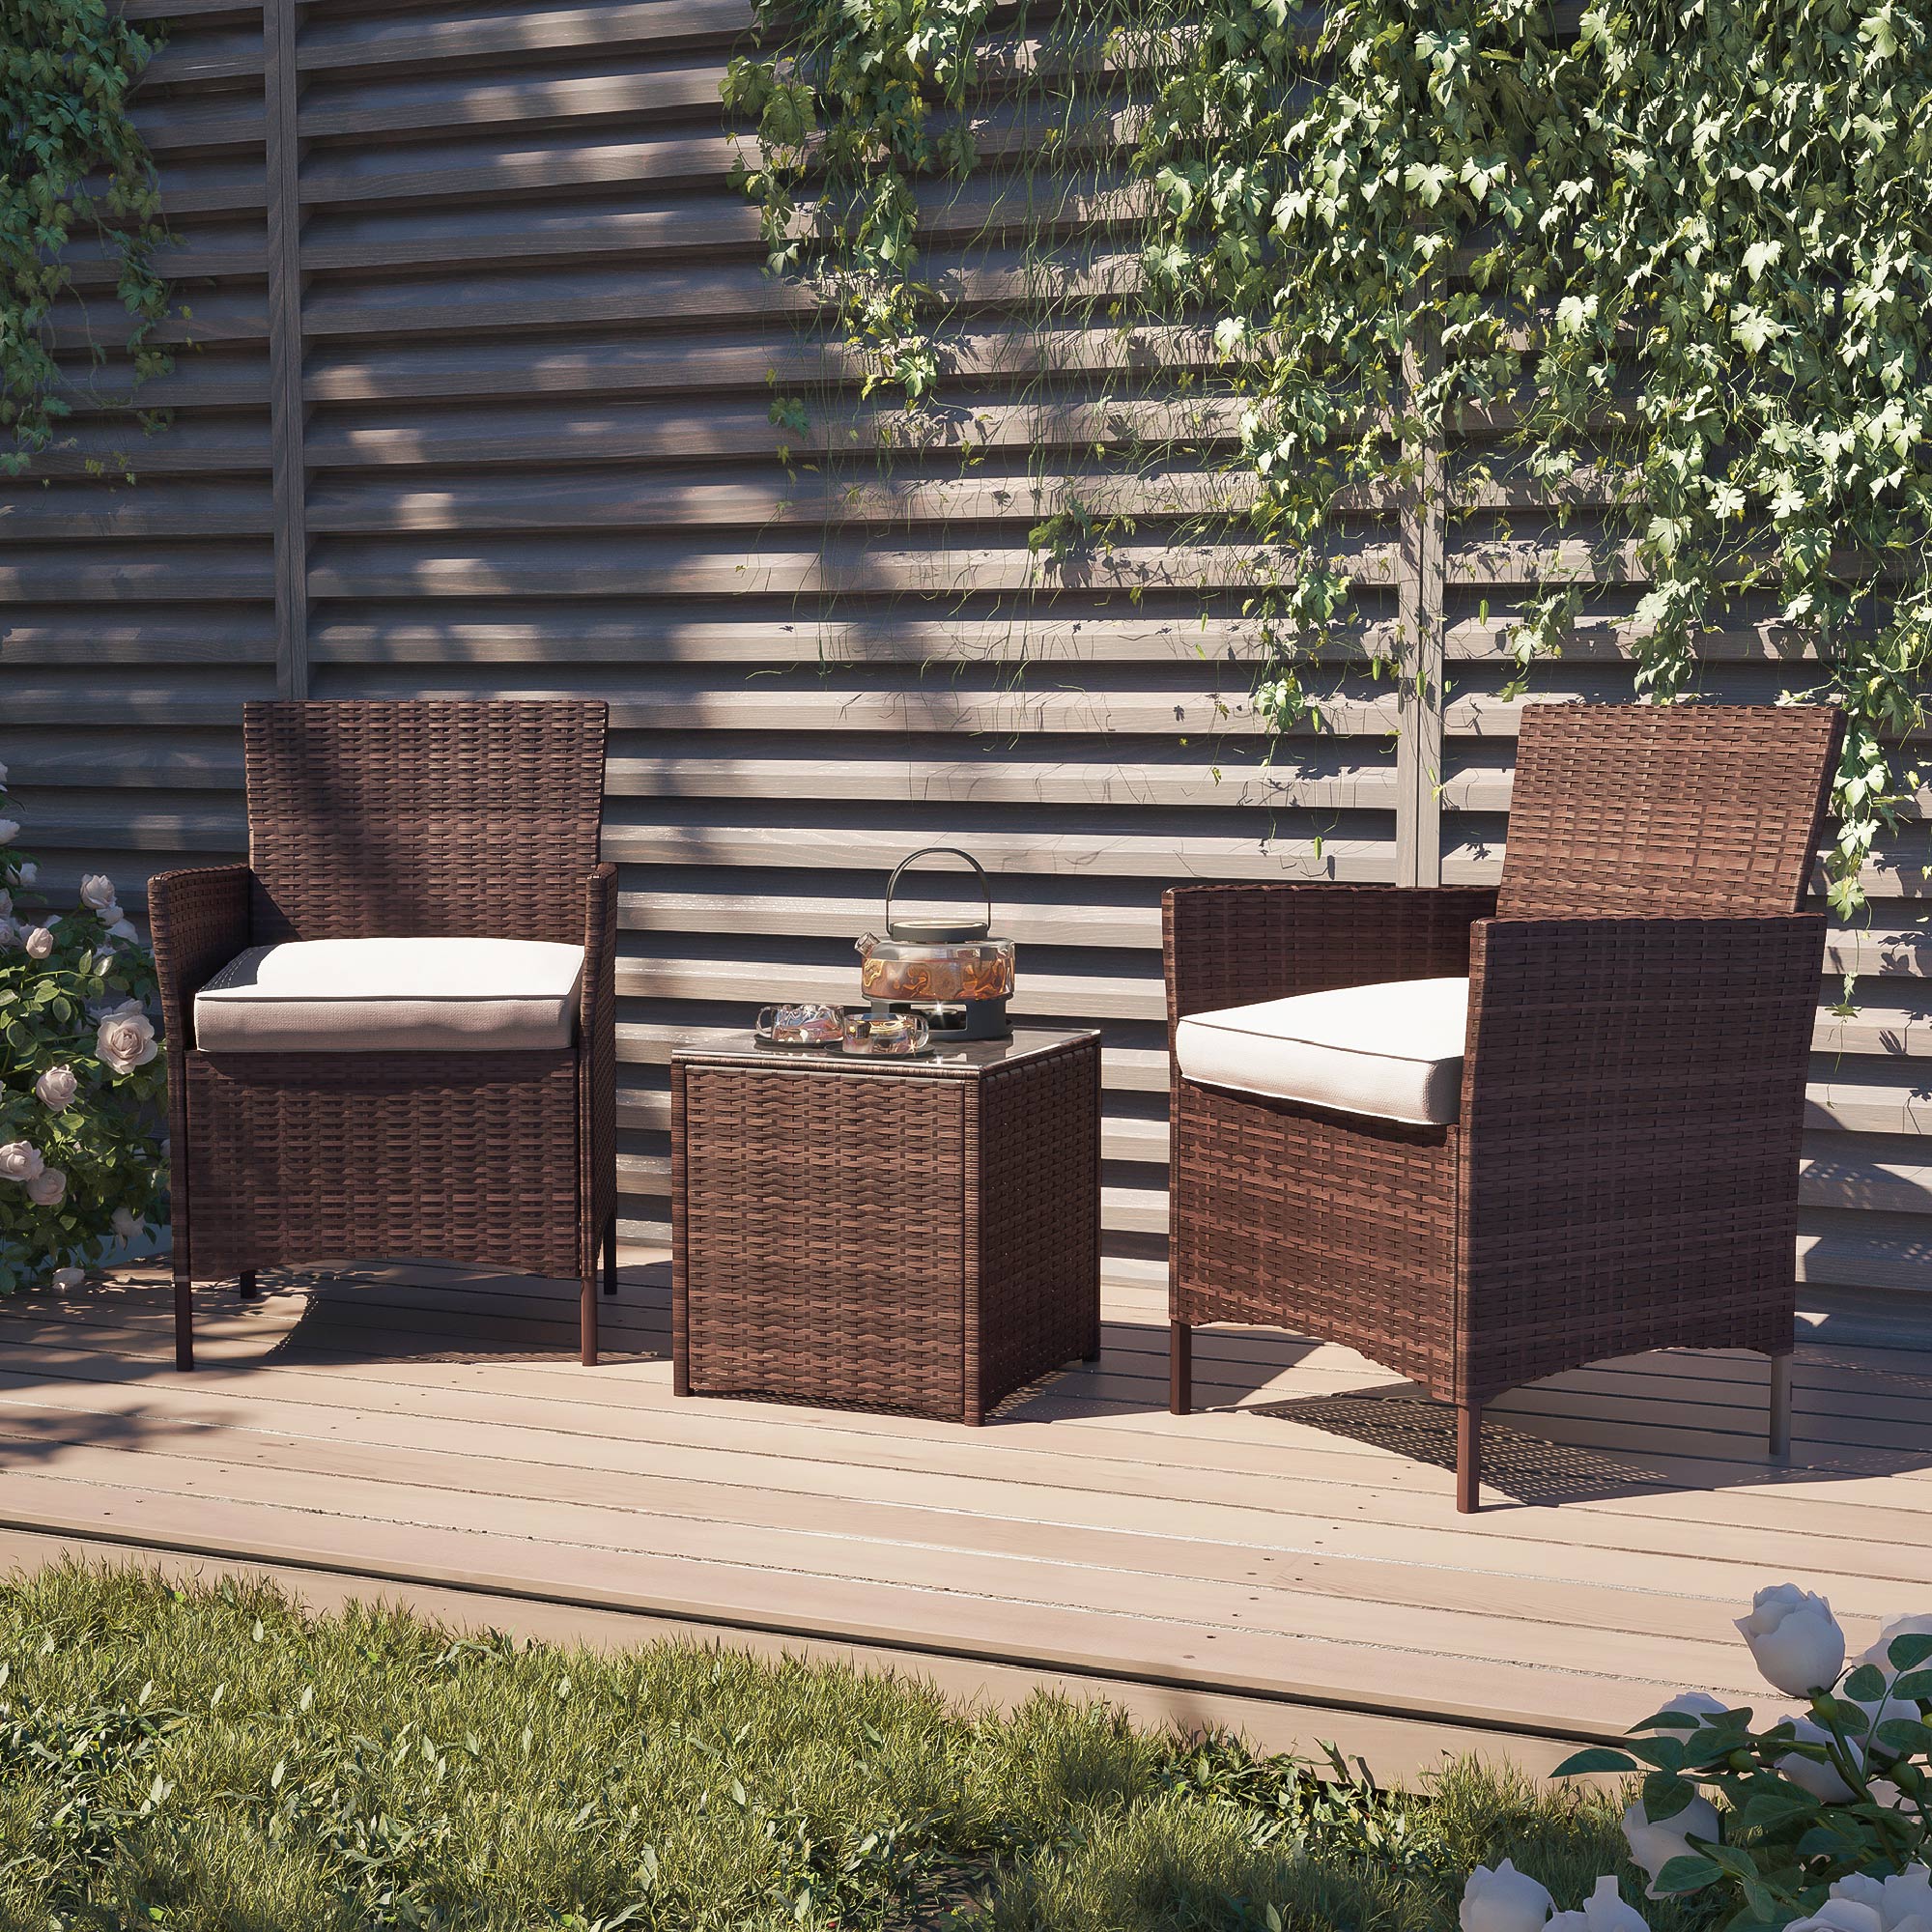 BELLEZE Wicker Furniture Outdoor Set 3 Piece Patio Outdoor Rattan Patio Set Two Chairs One Glass Table Brown - image 2 of 6